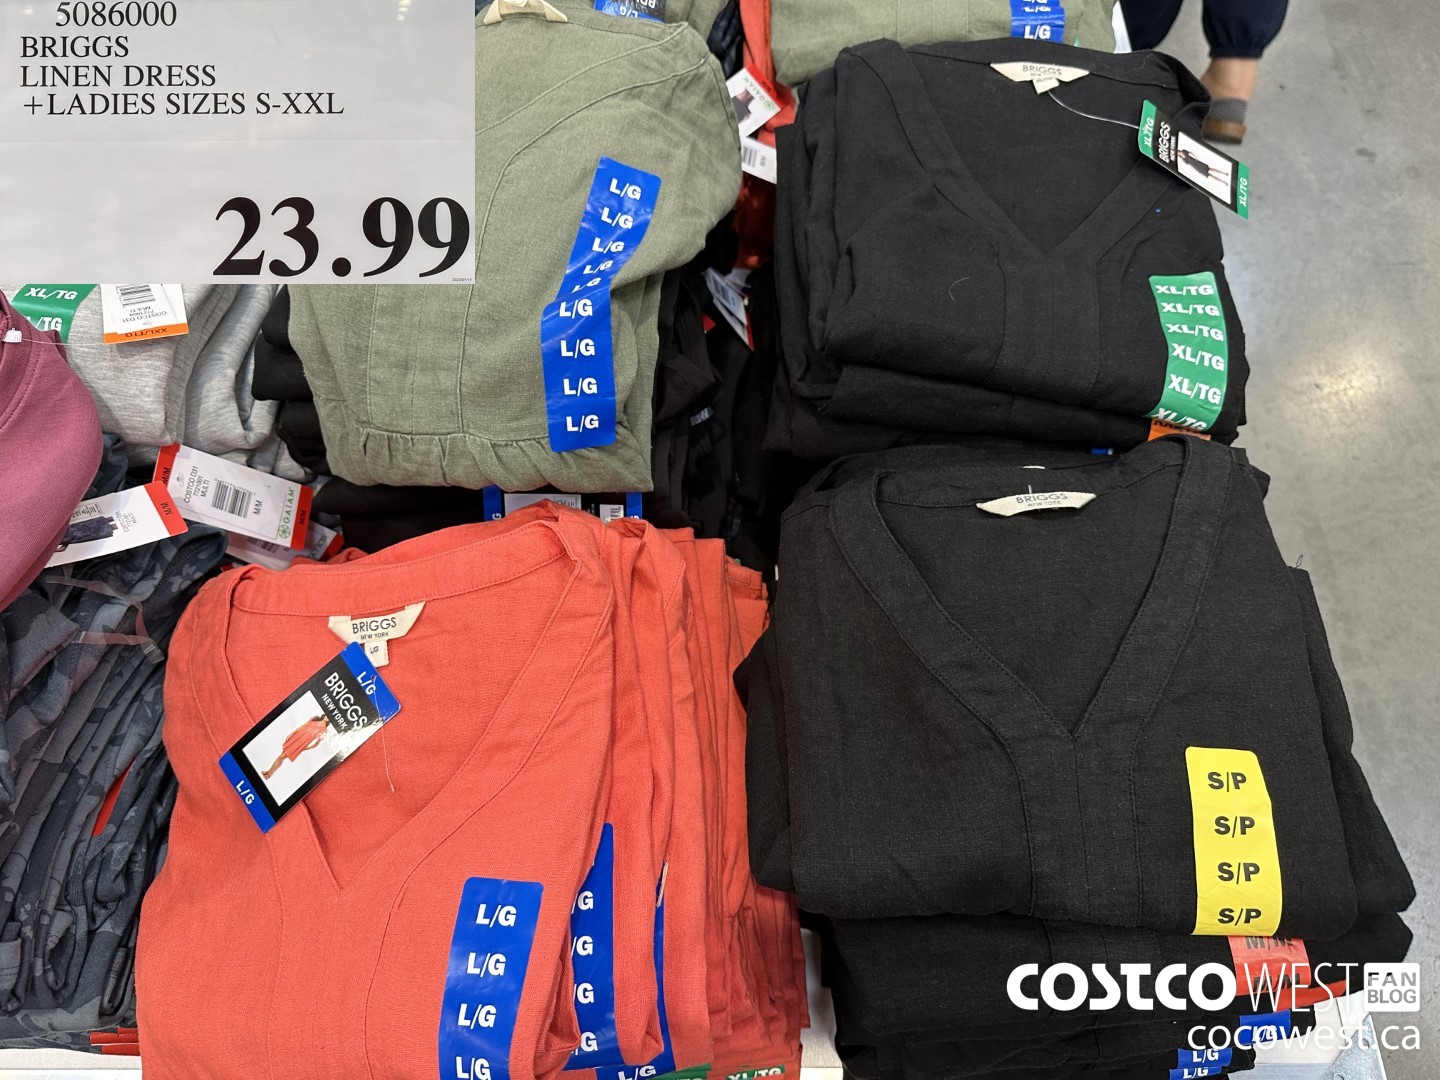 LAZYPANTS at Costco Canada!! ⠀ T-Shirt Dresses from @Lazypants is